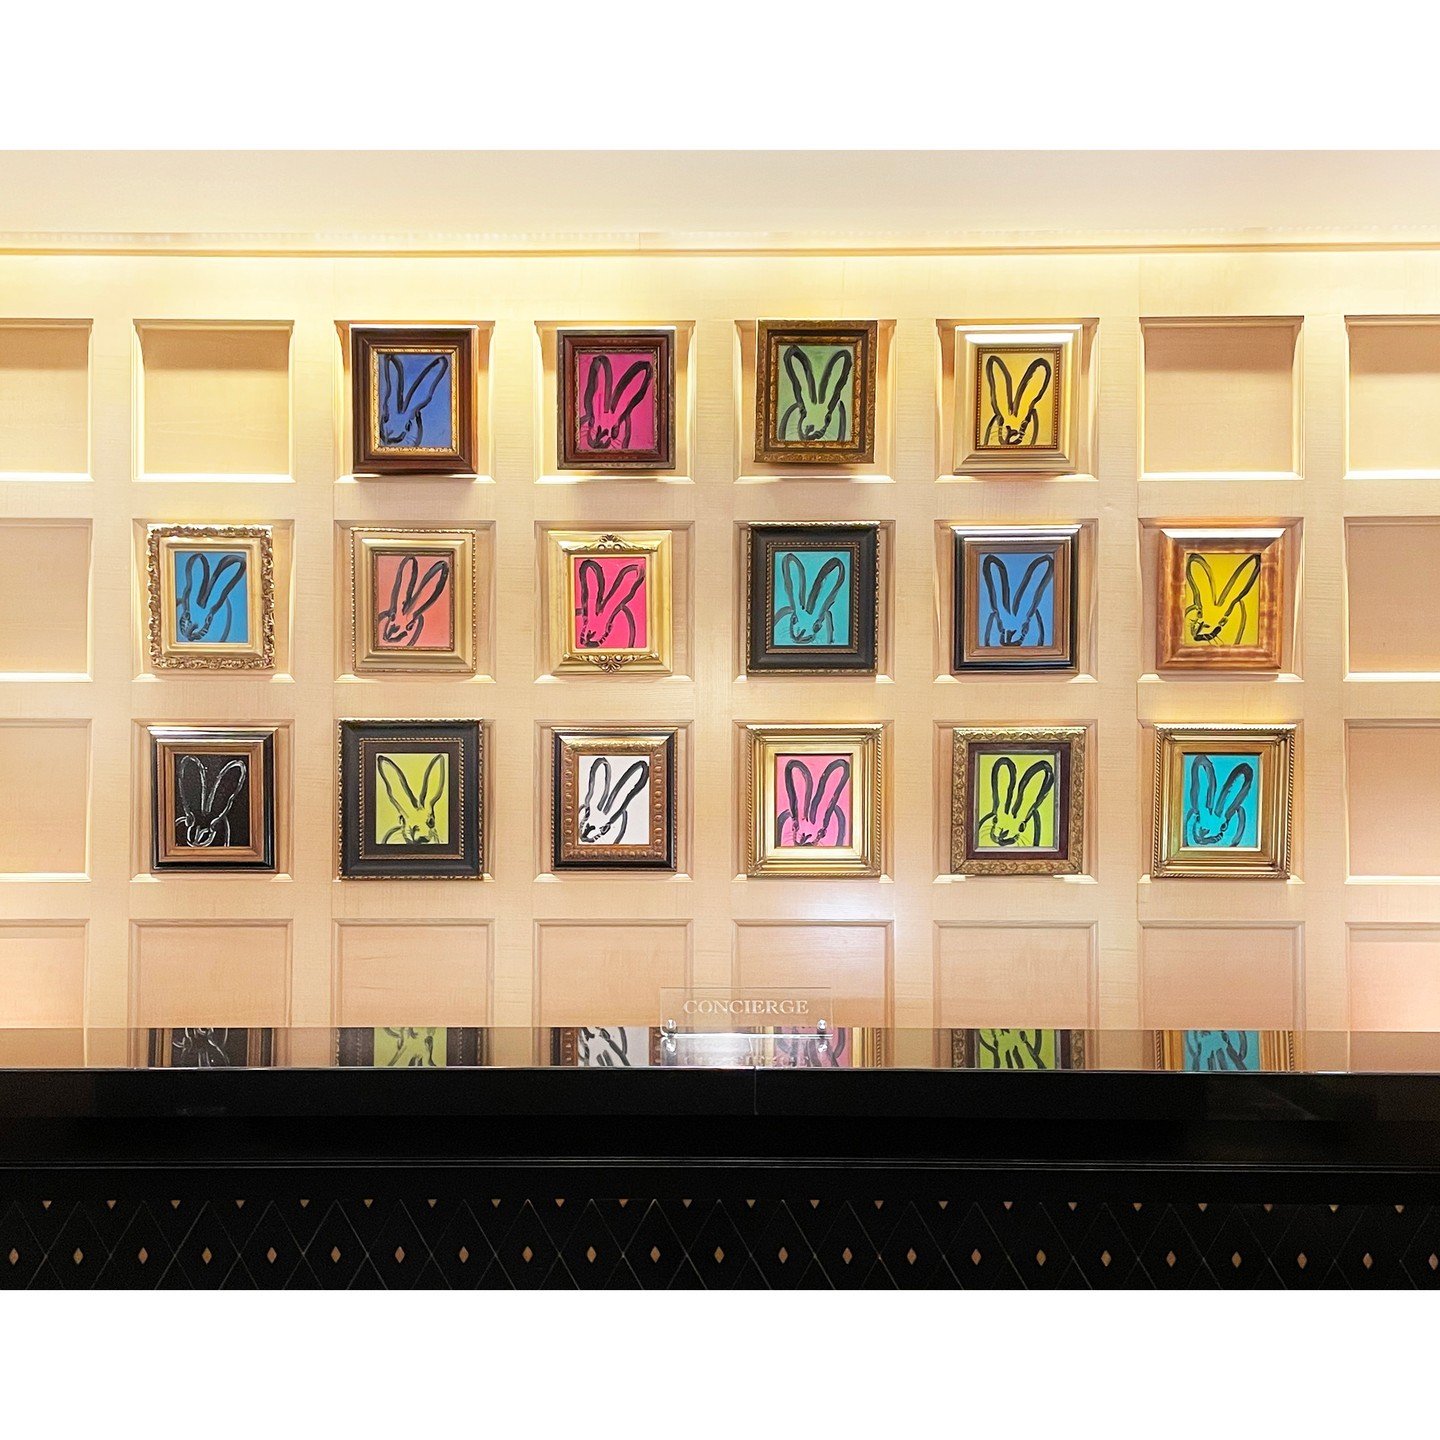 As seen in #Forbes magazine's '8 Hotels with Gallery-Worthy Art Collections!' 🥰 its our honor to curate this ever-changing collection, see below a highlight of some of our favorite installations at the #FSWashington. Featuring #HuntSlonem, #Campbell